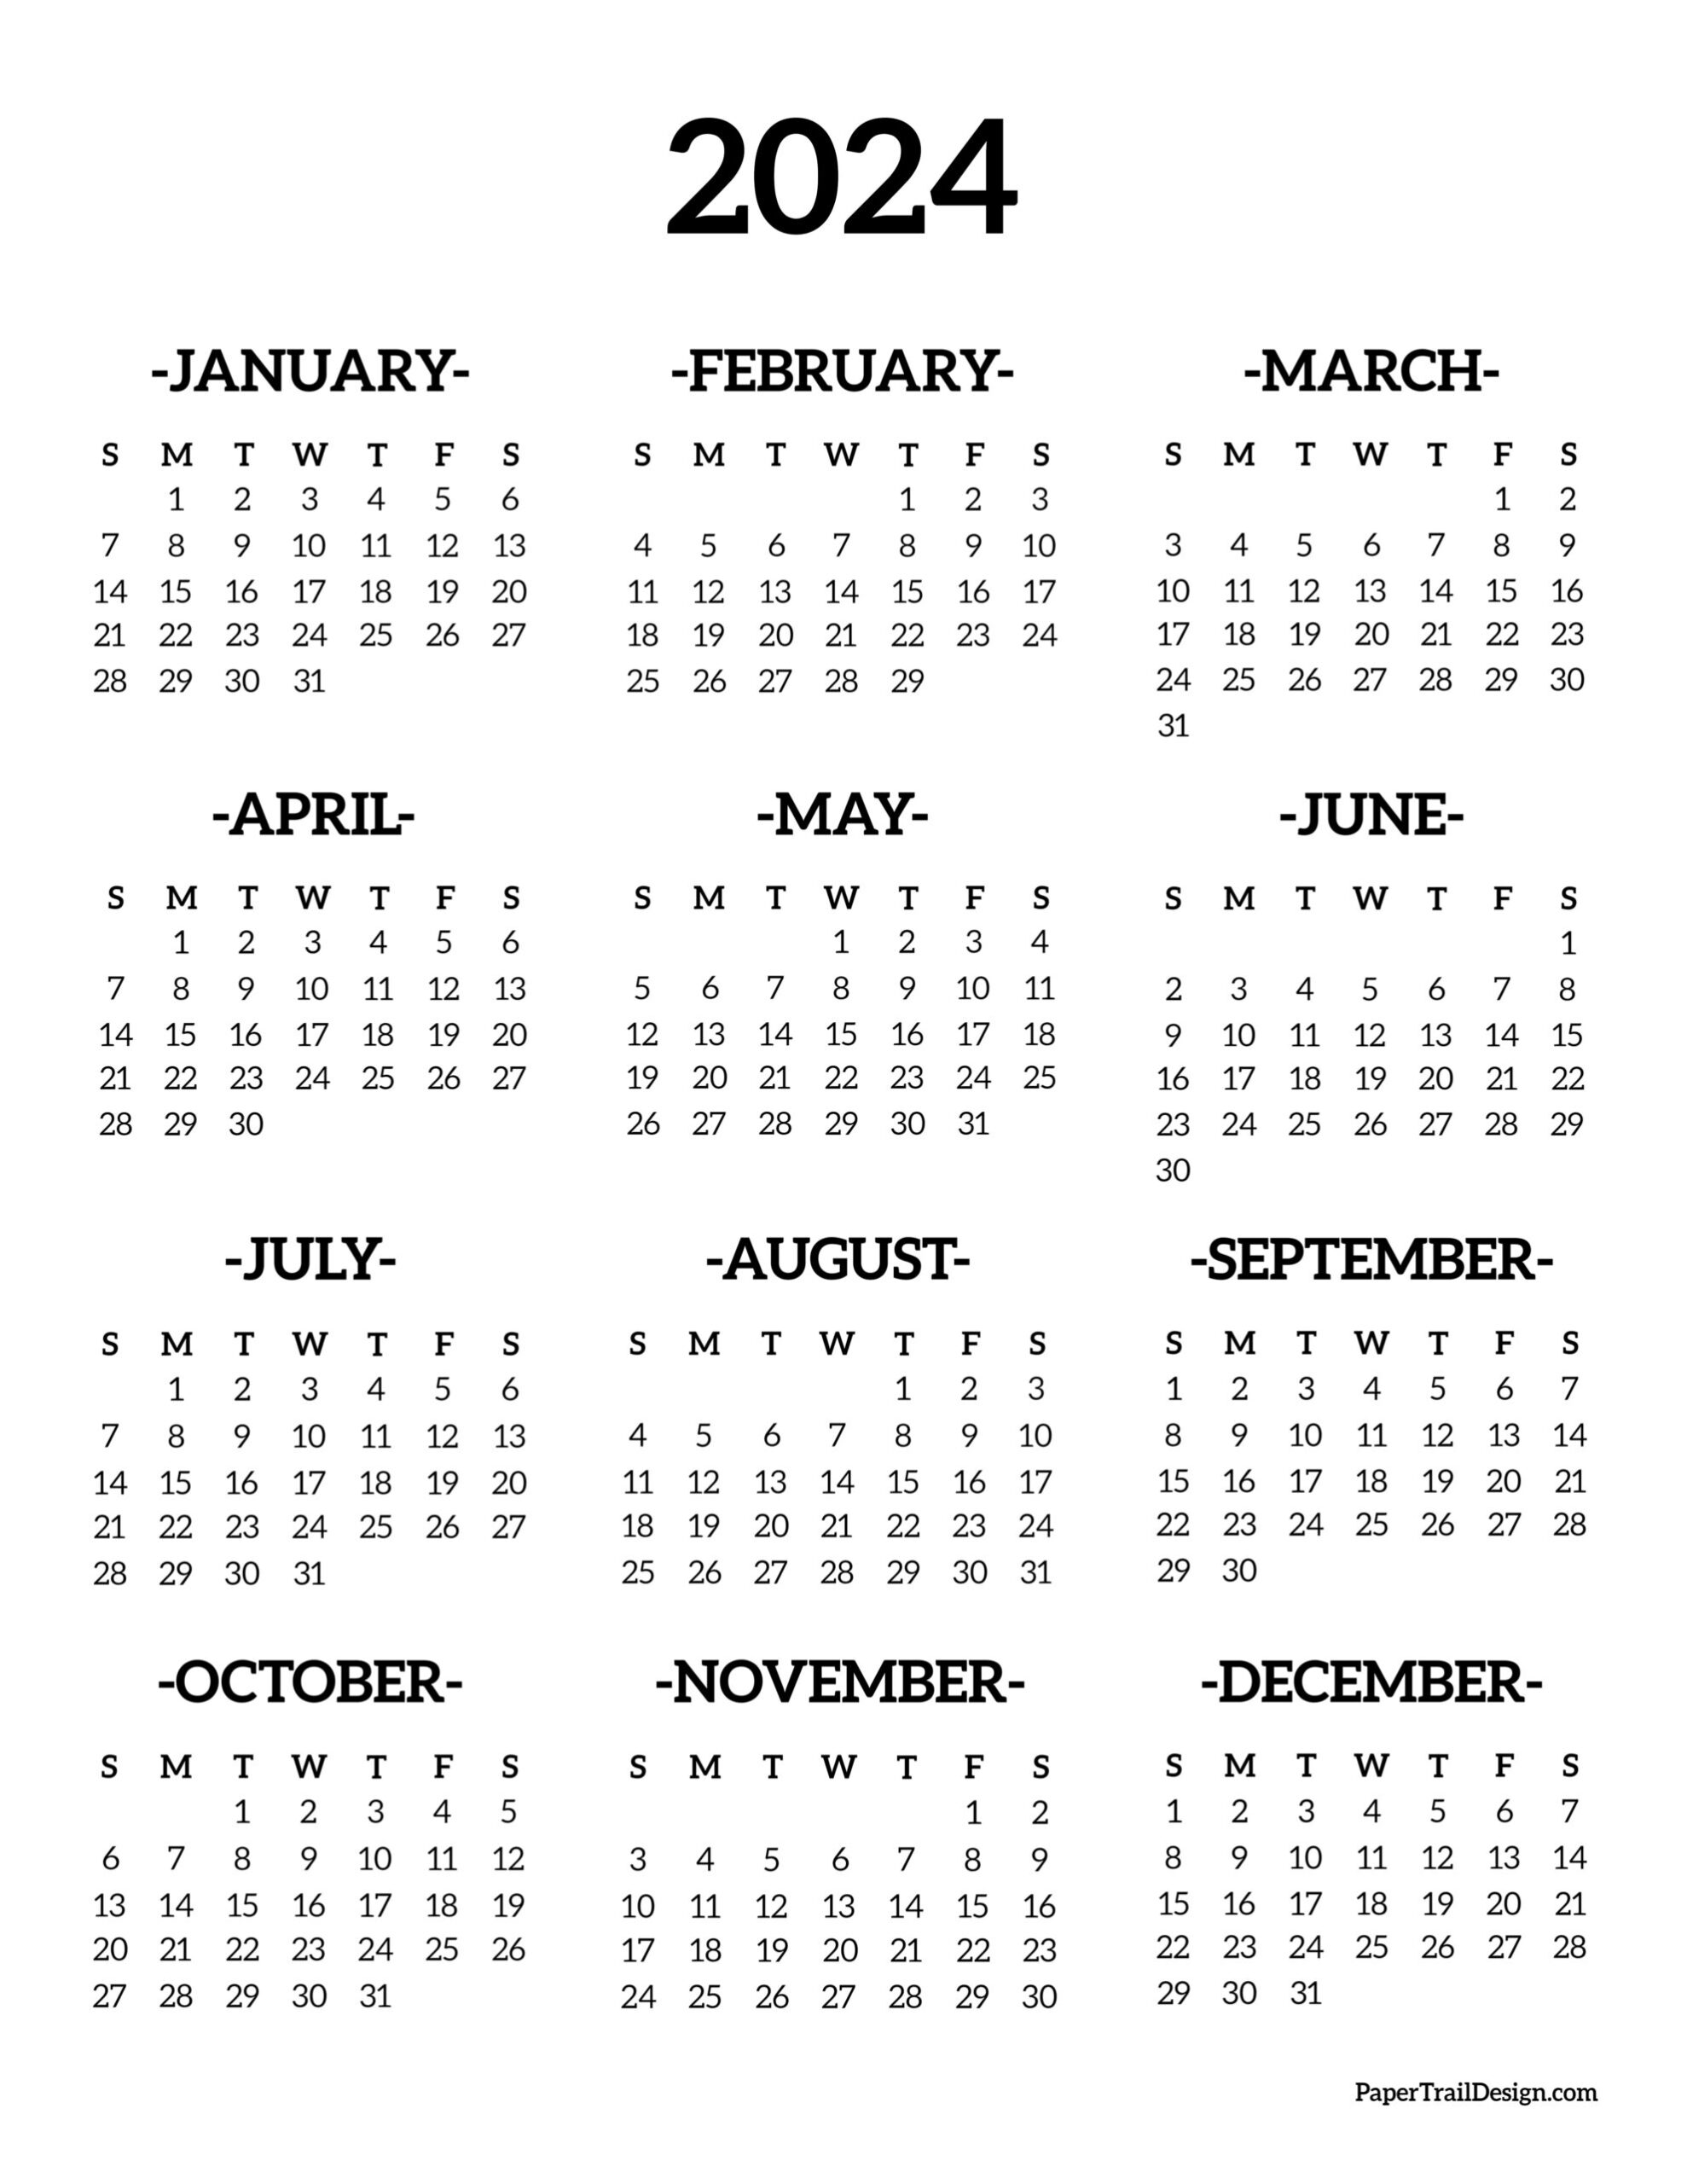 Calendar 2024 Printable One Page - Paper Trail Design for 2024 Printable Calendar Year